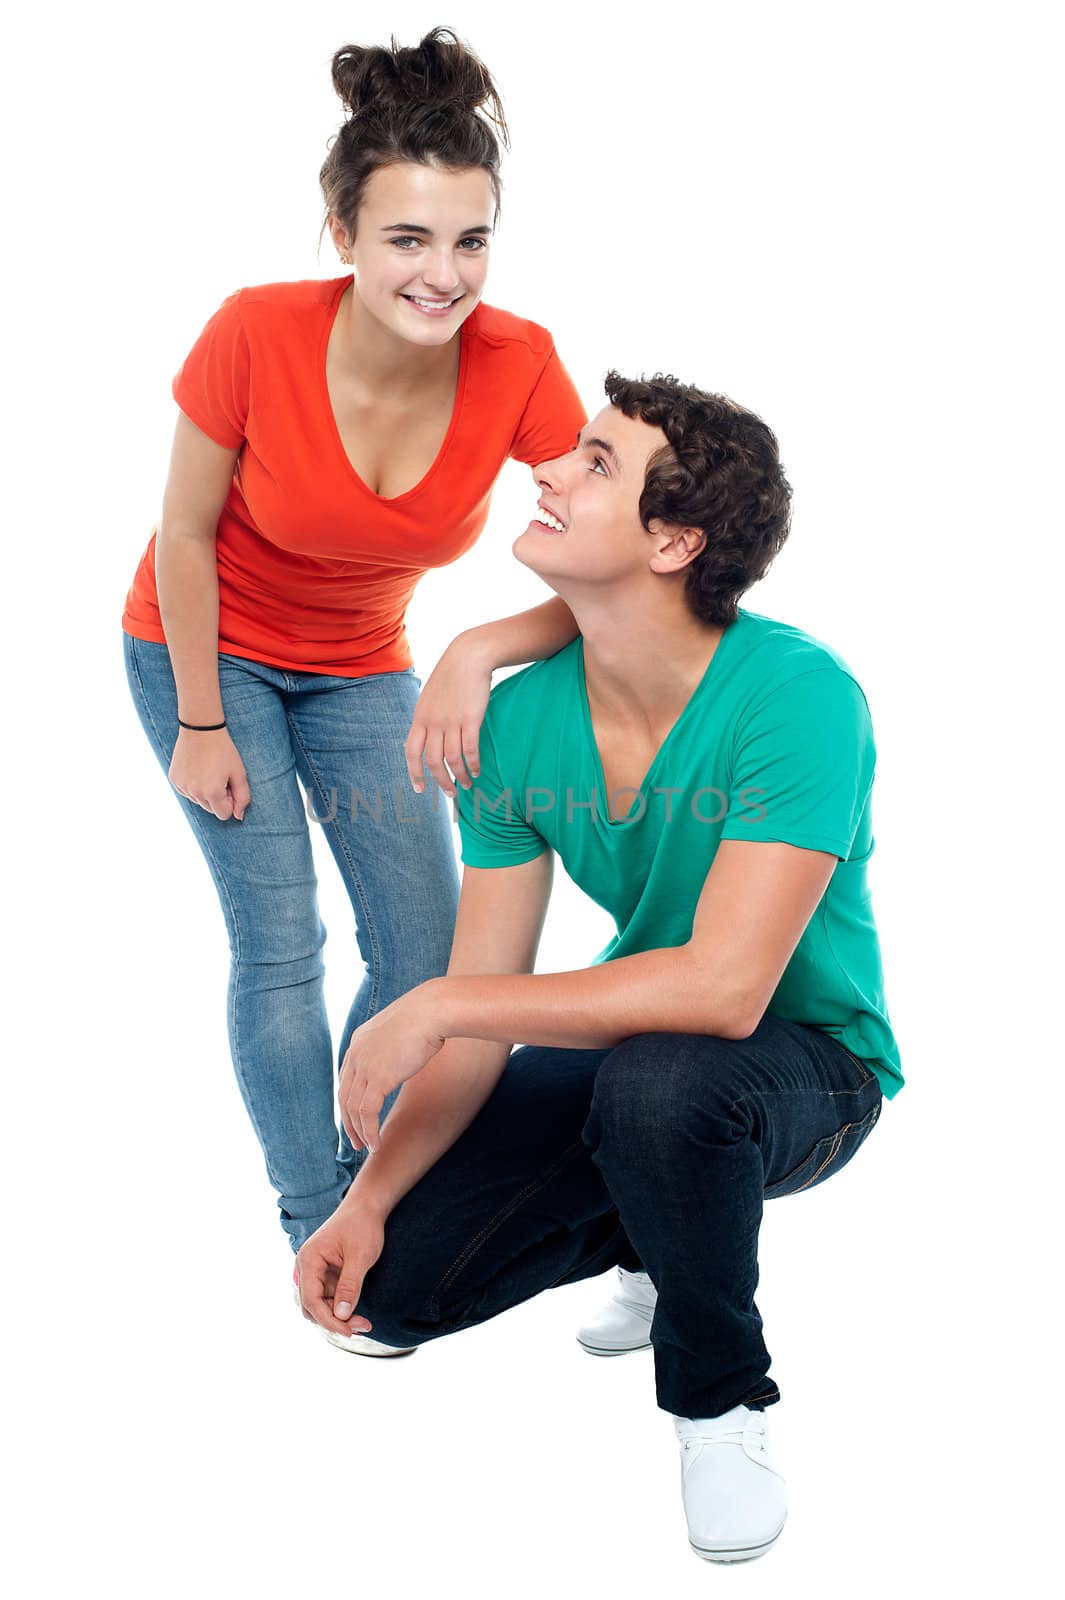 Adorable young guy squatting on floor and looking at his girlfriend